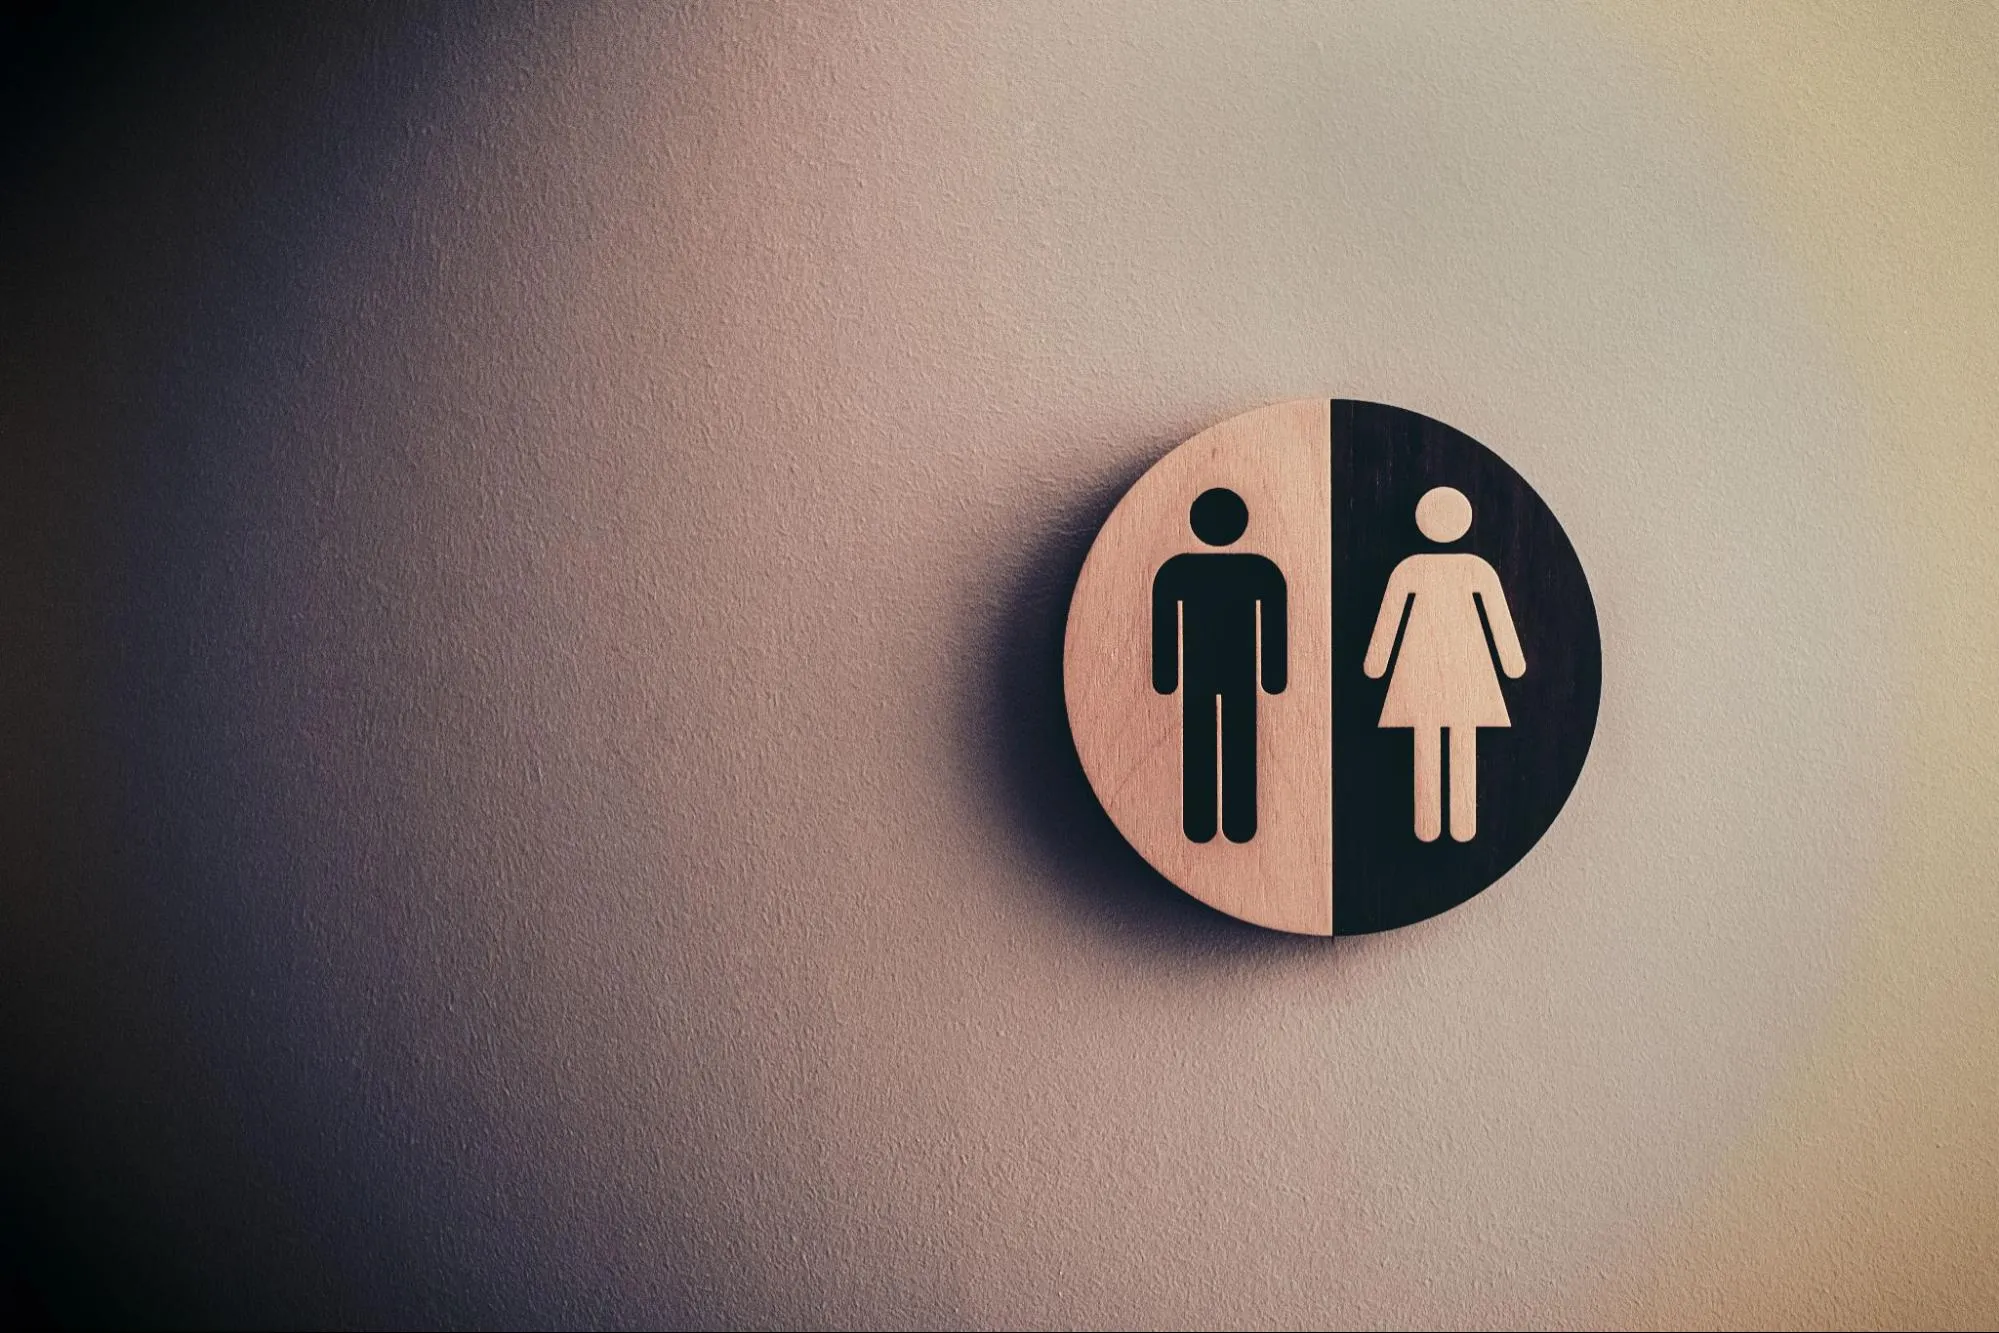 How Do You Specify Gender-Neutral Toilets?